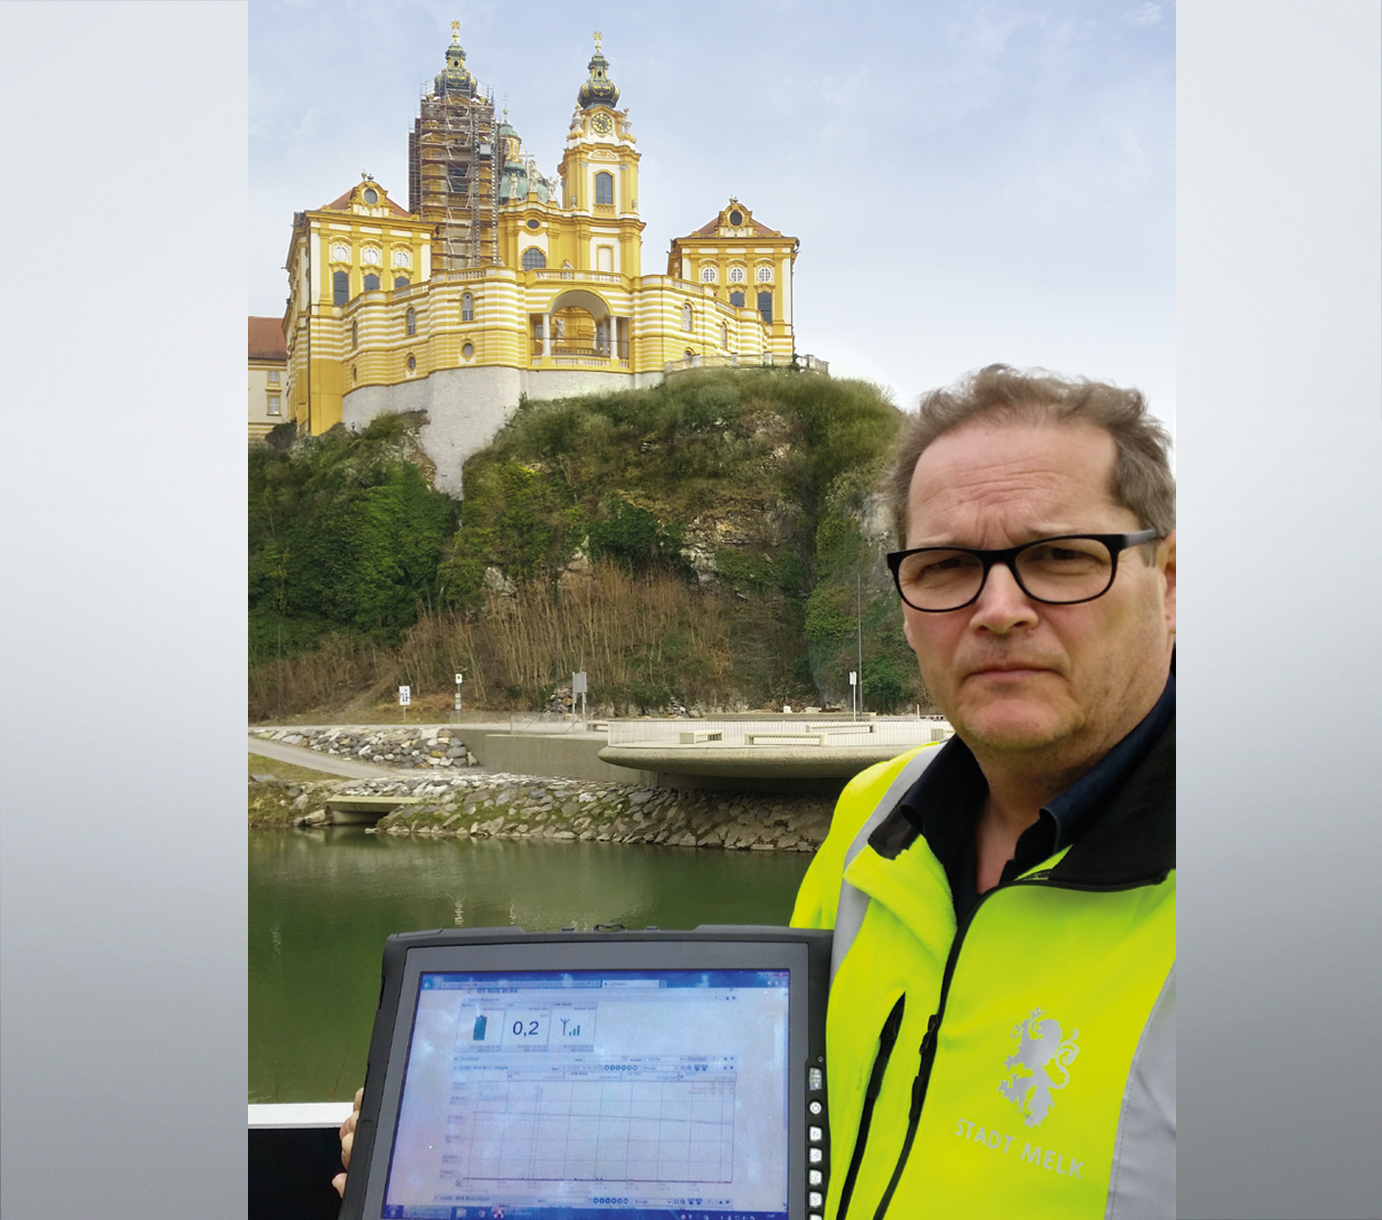 Treatment plant employee Marius Probst in front of Melk Abbey